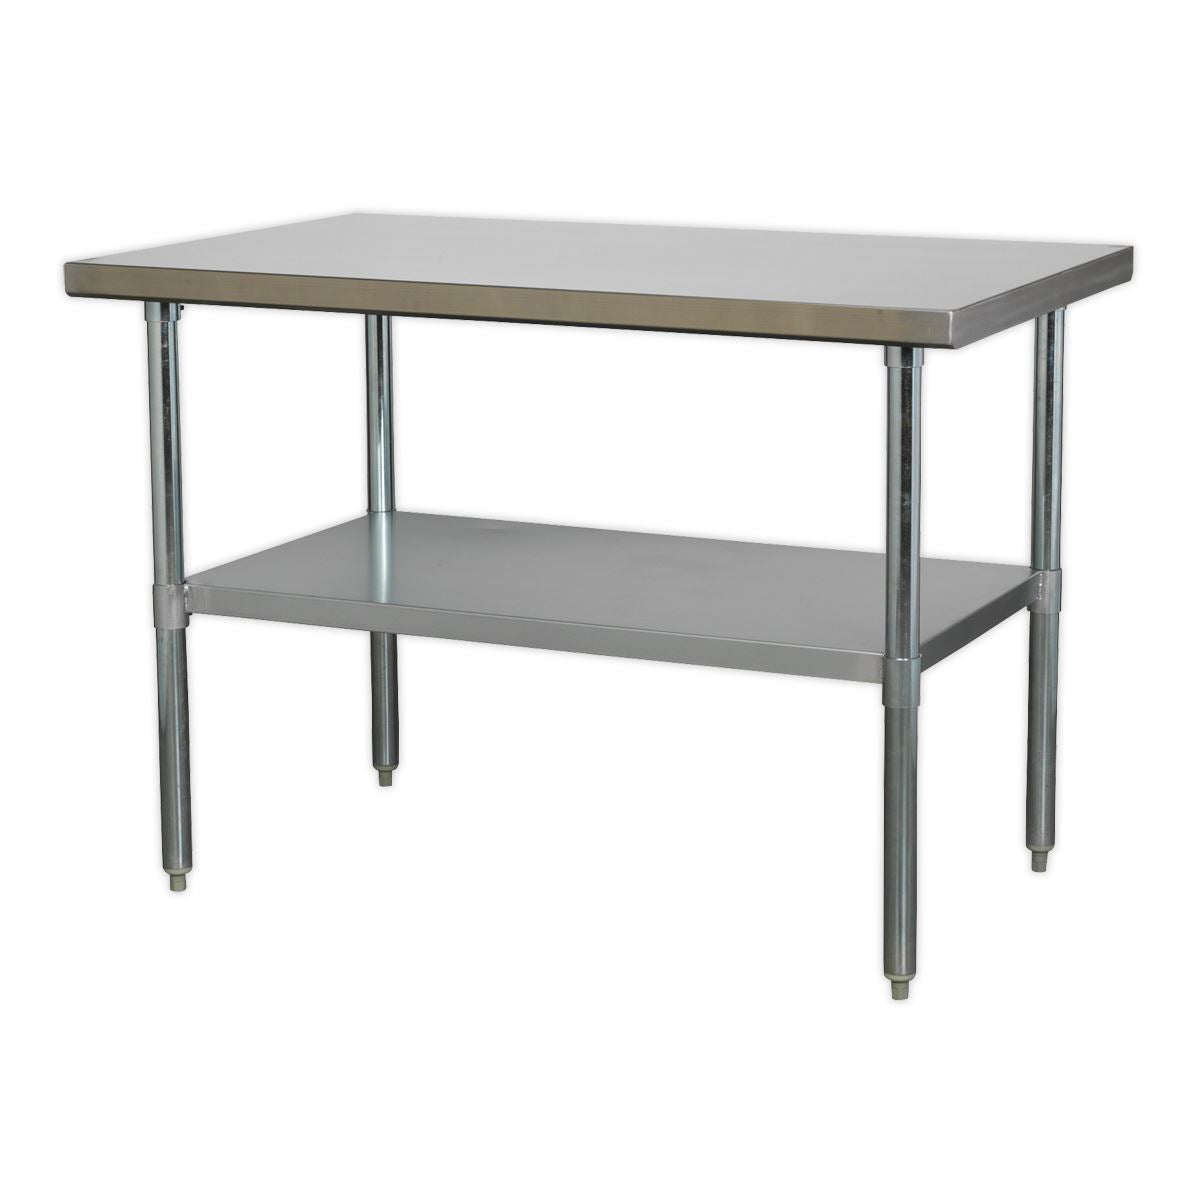 Sealey Stainless Steel Workbench 1.2m